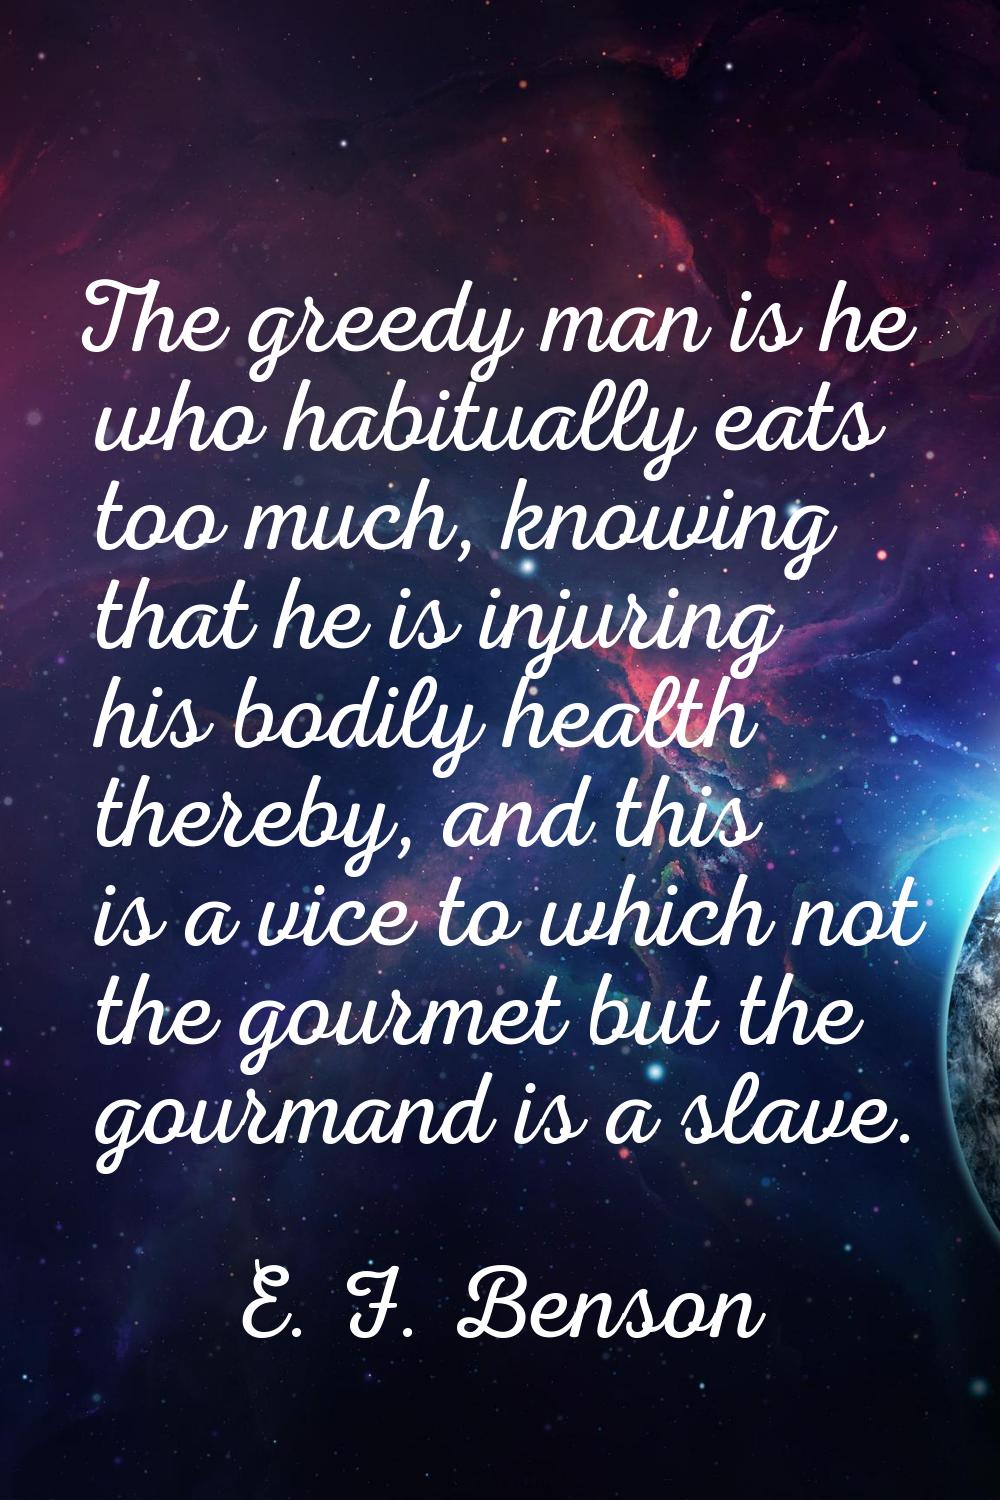 The greedy man is he who habitually eats too much, knowing that he is injuring his bodily health th